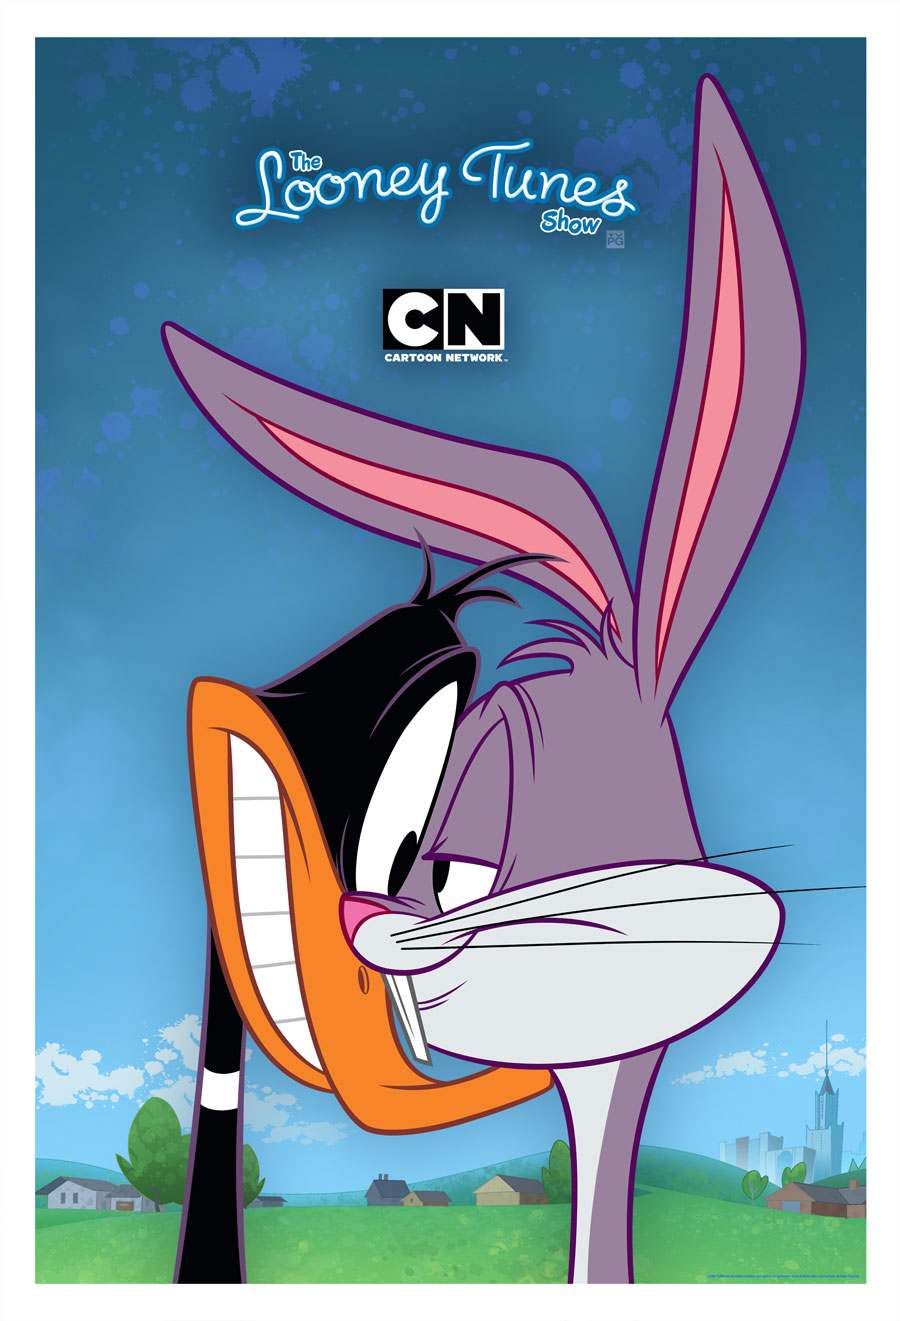 The Looney Tunes Show Wallpapers